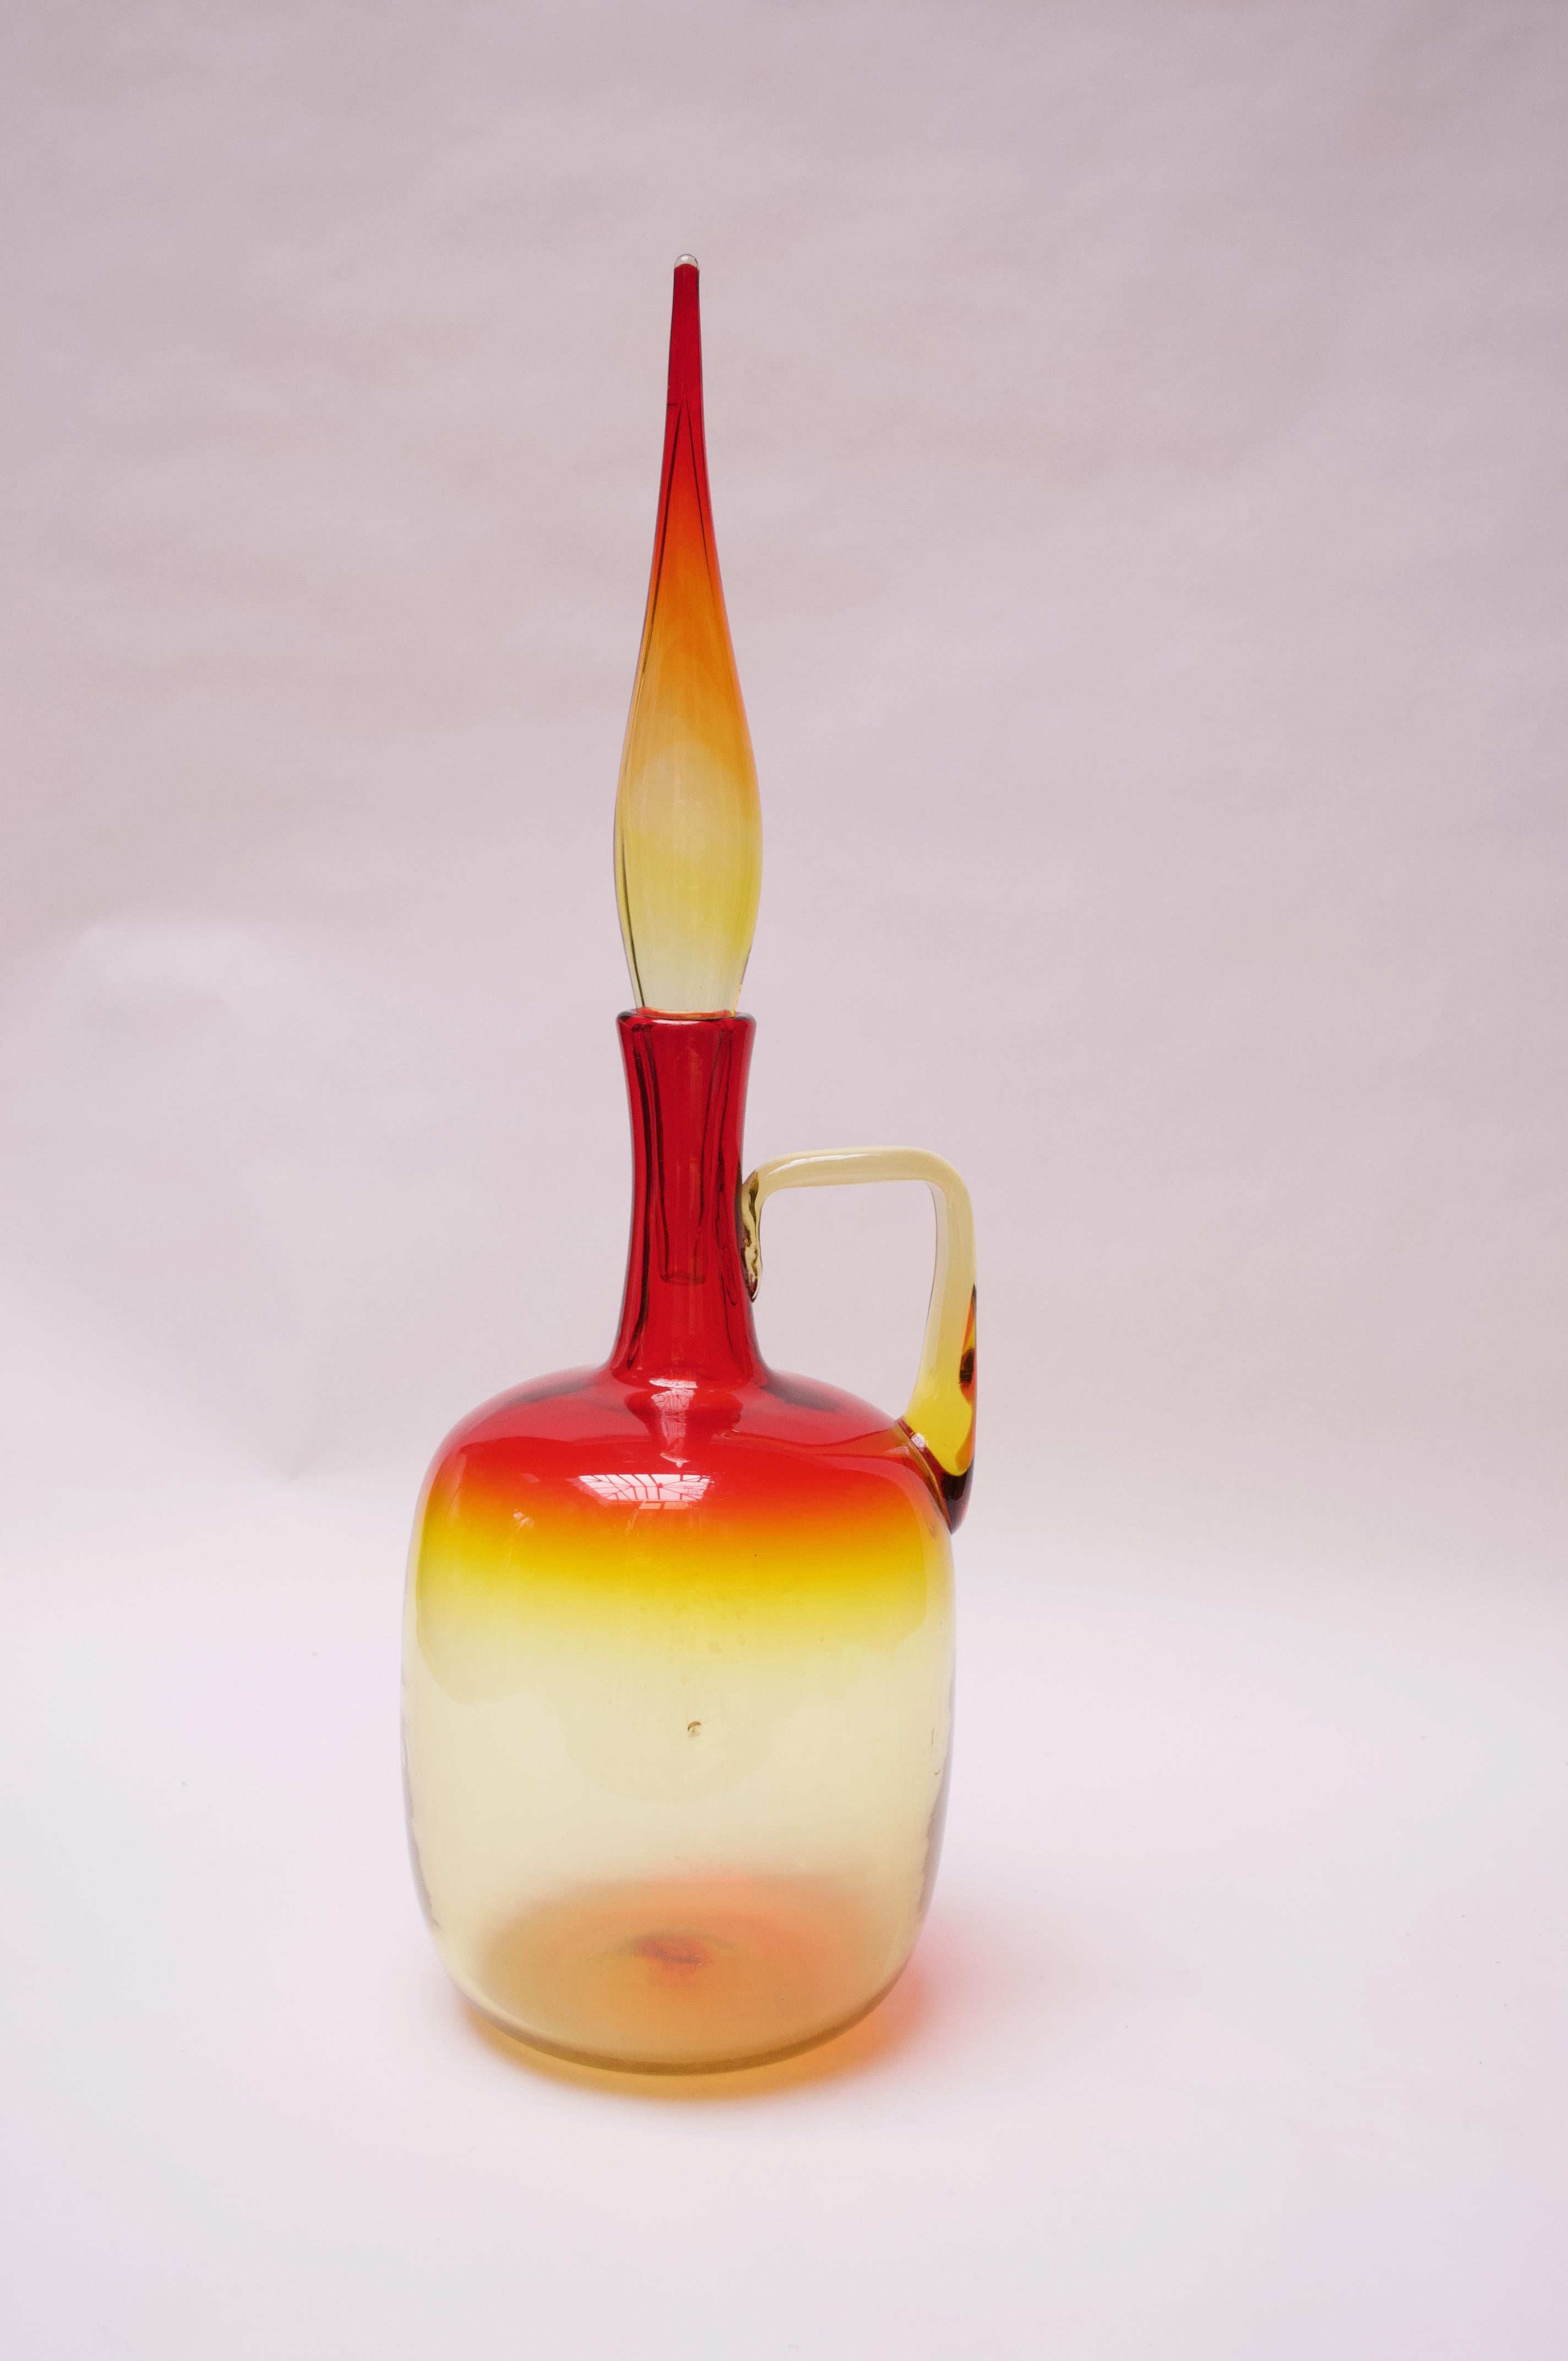 Blown glass decanter designed in the 1960s by Wayne Husted for Blenko. Uncommon example with applied handle and original flame stopper. Large size and attractive amberina / tangerine palette in bold red and yellow. 
Features Blenko's signature